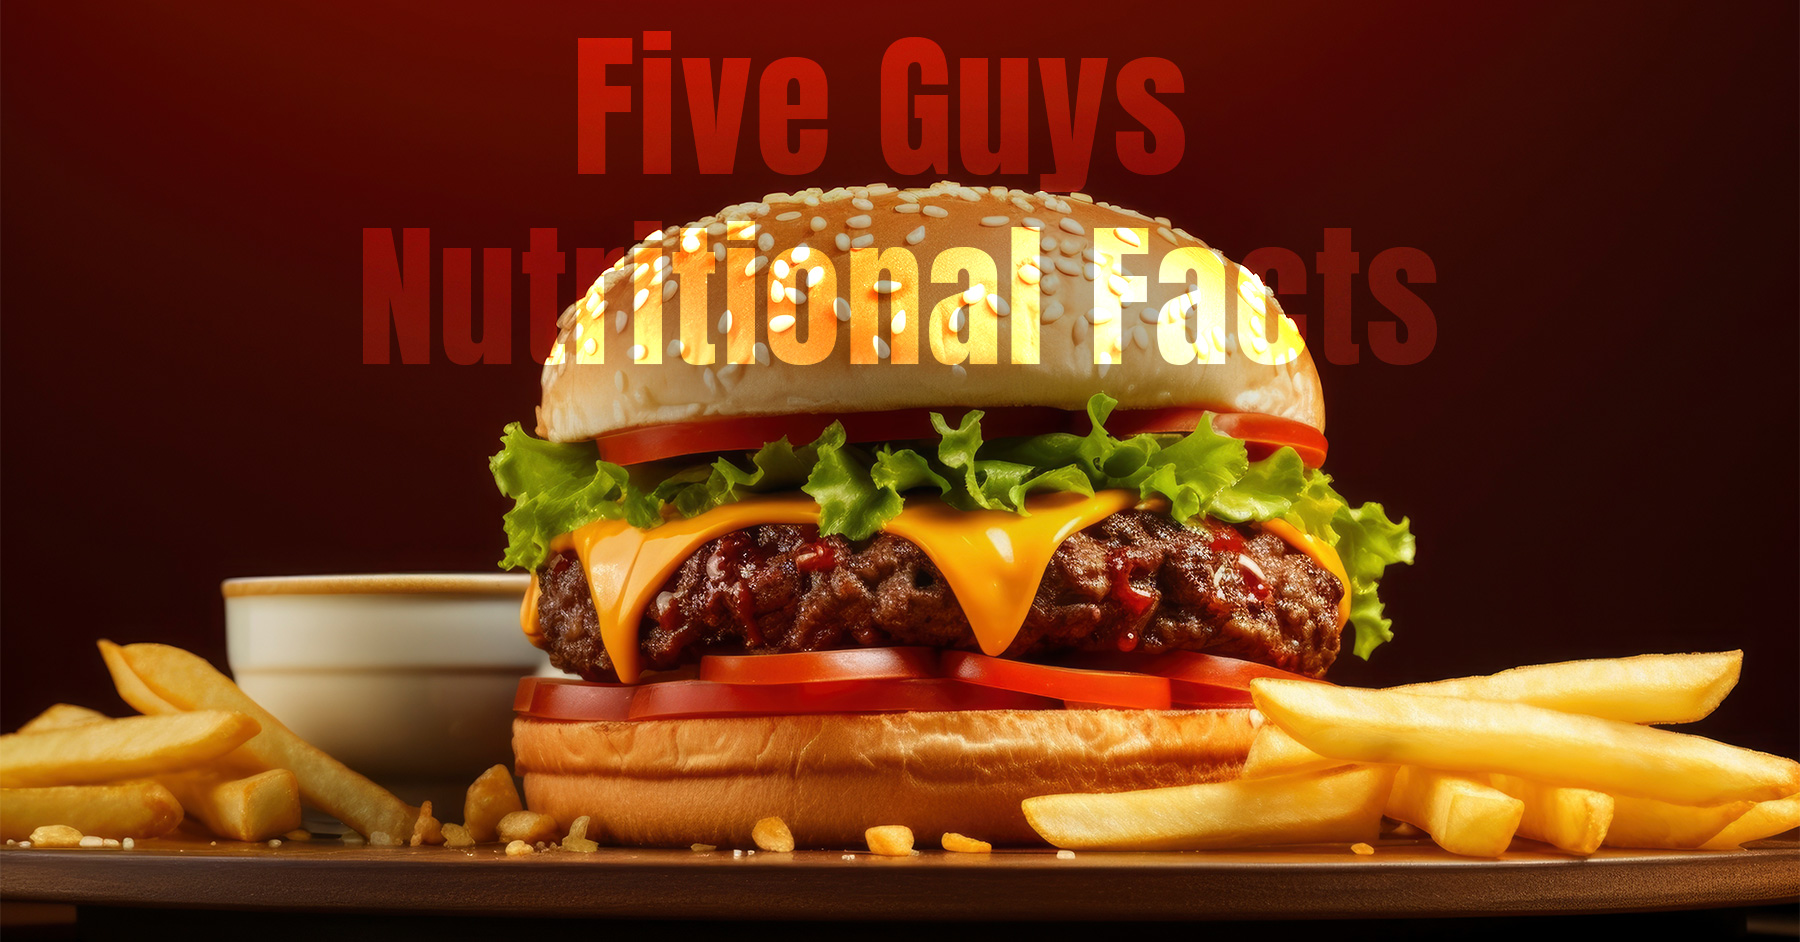 Five Guys Nutritional Facts